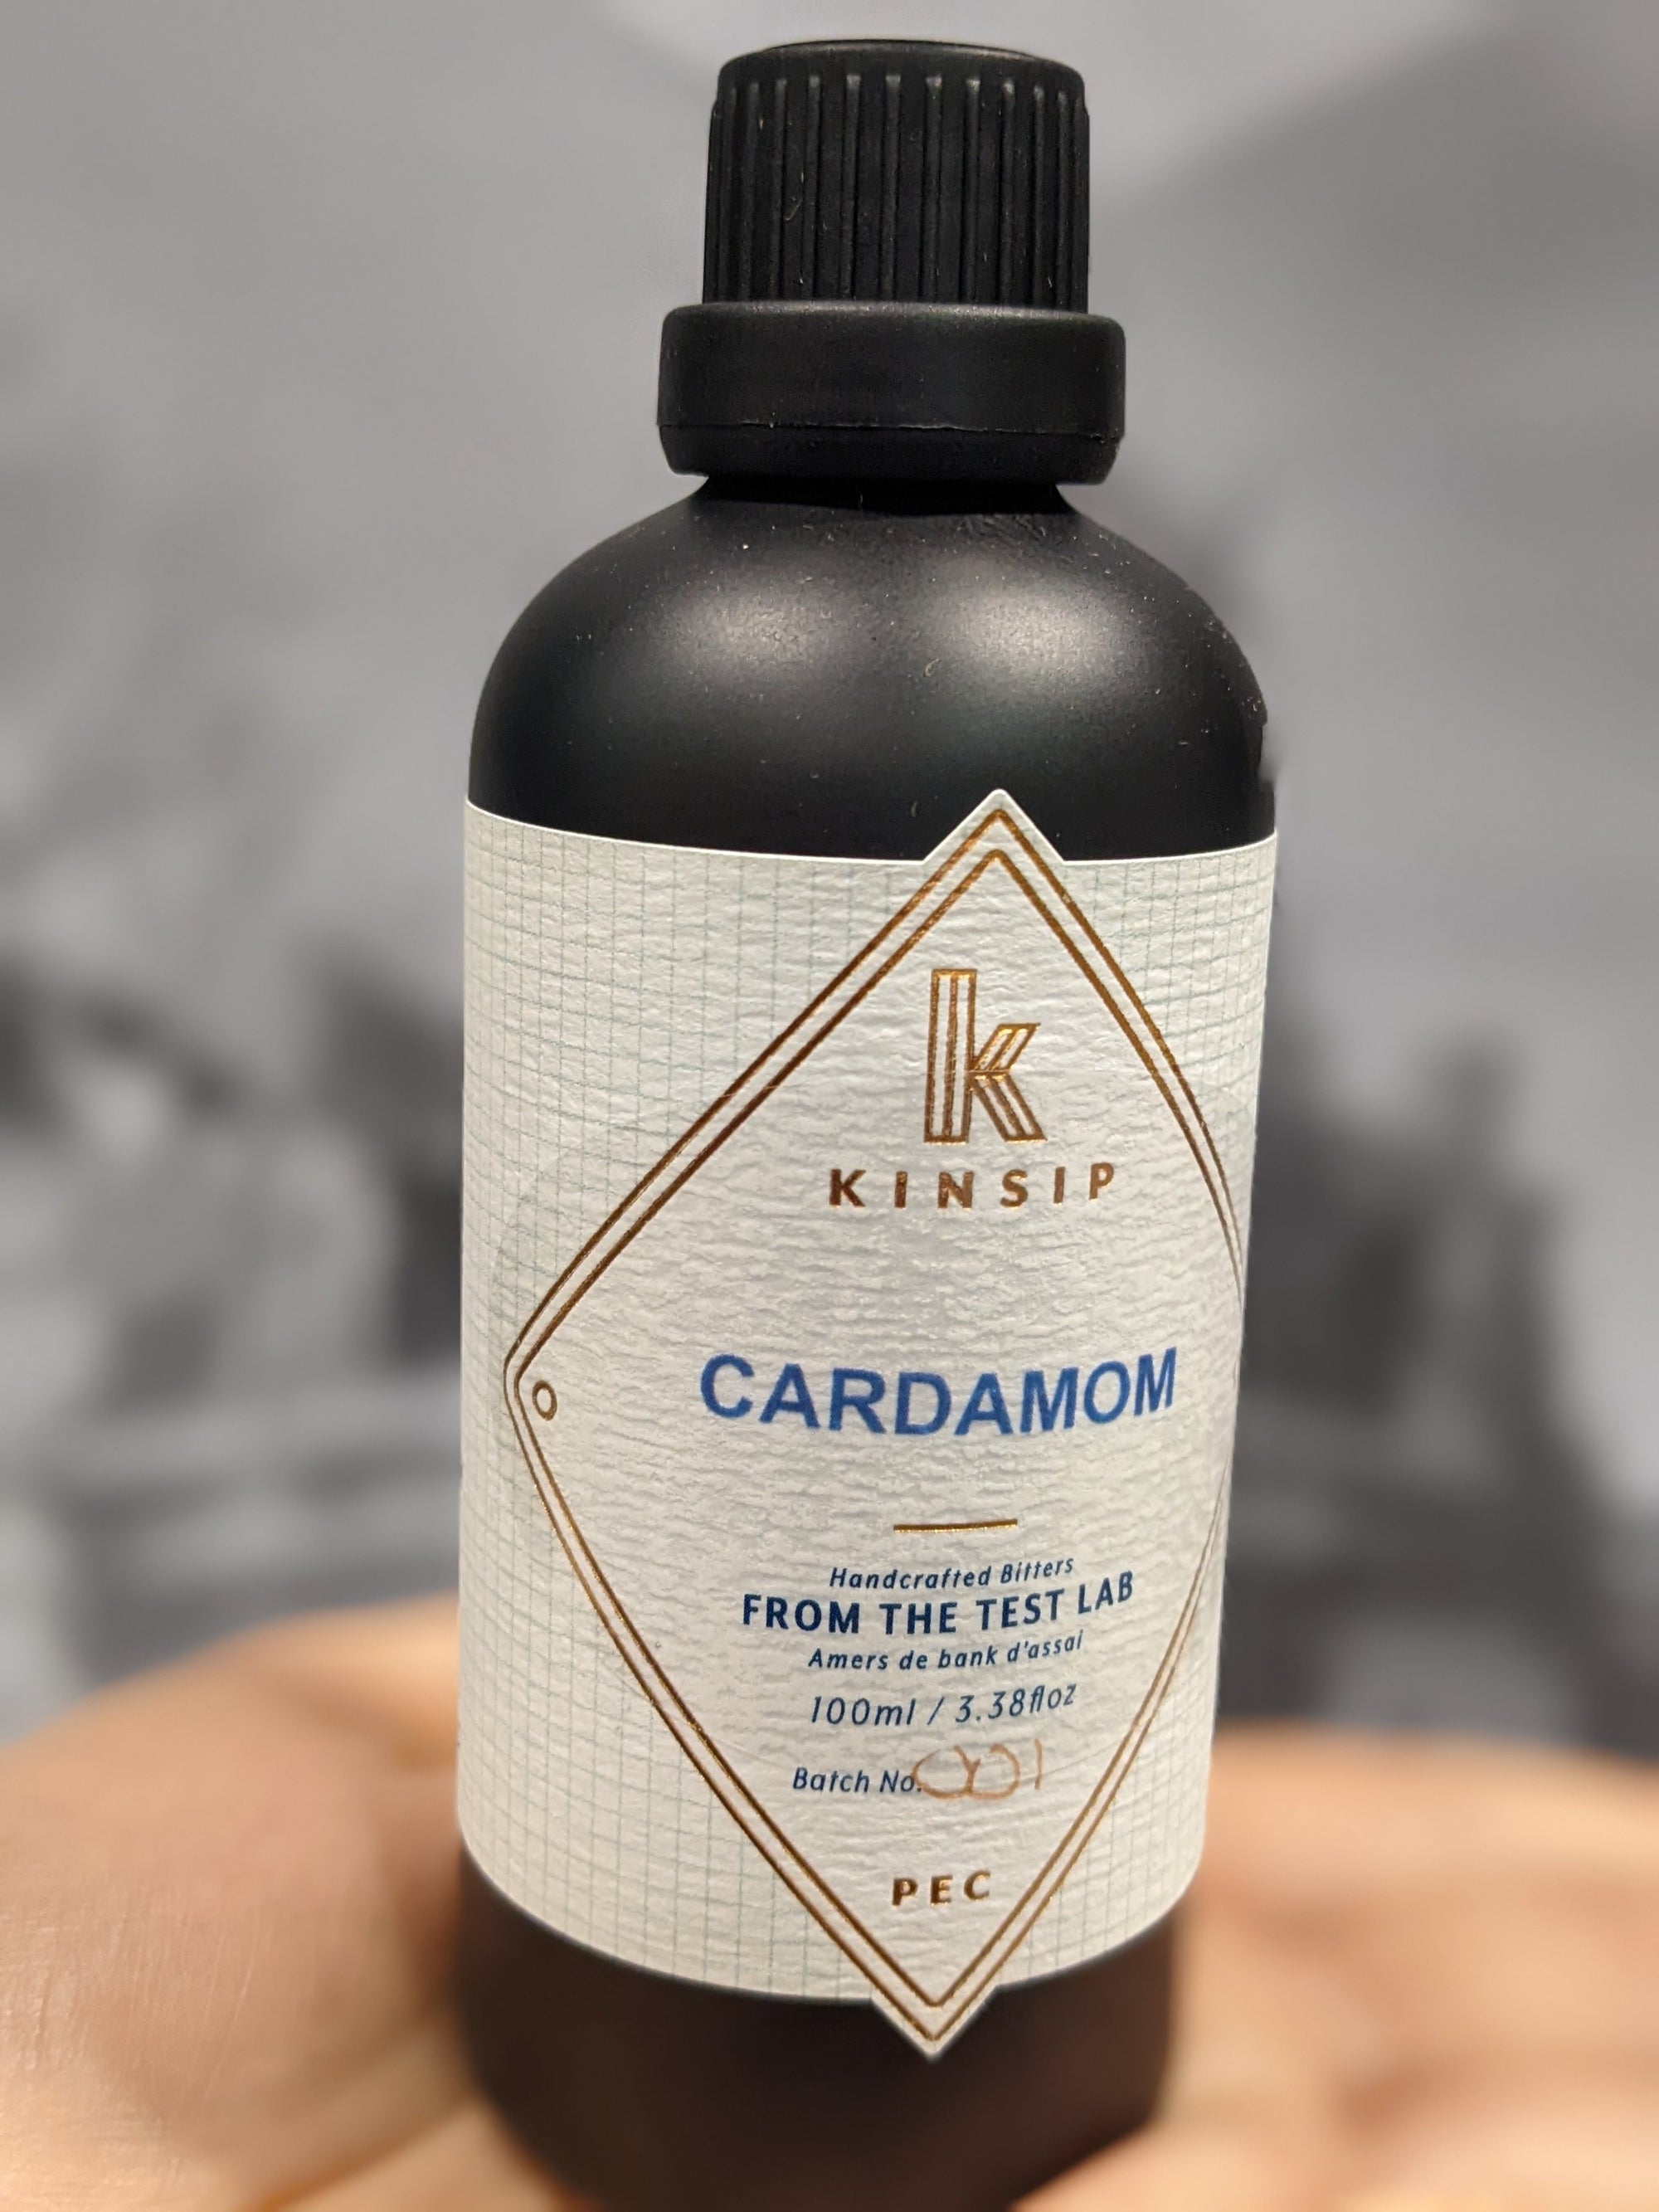 Cardamom Handcrafted Bitters